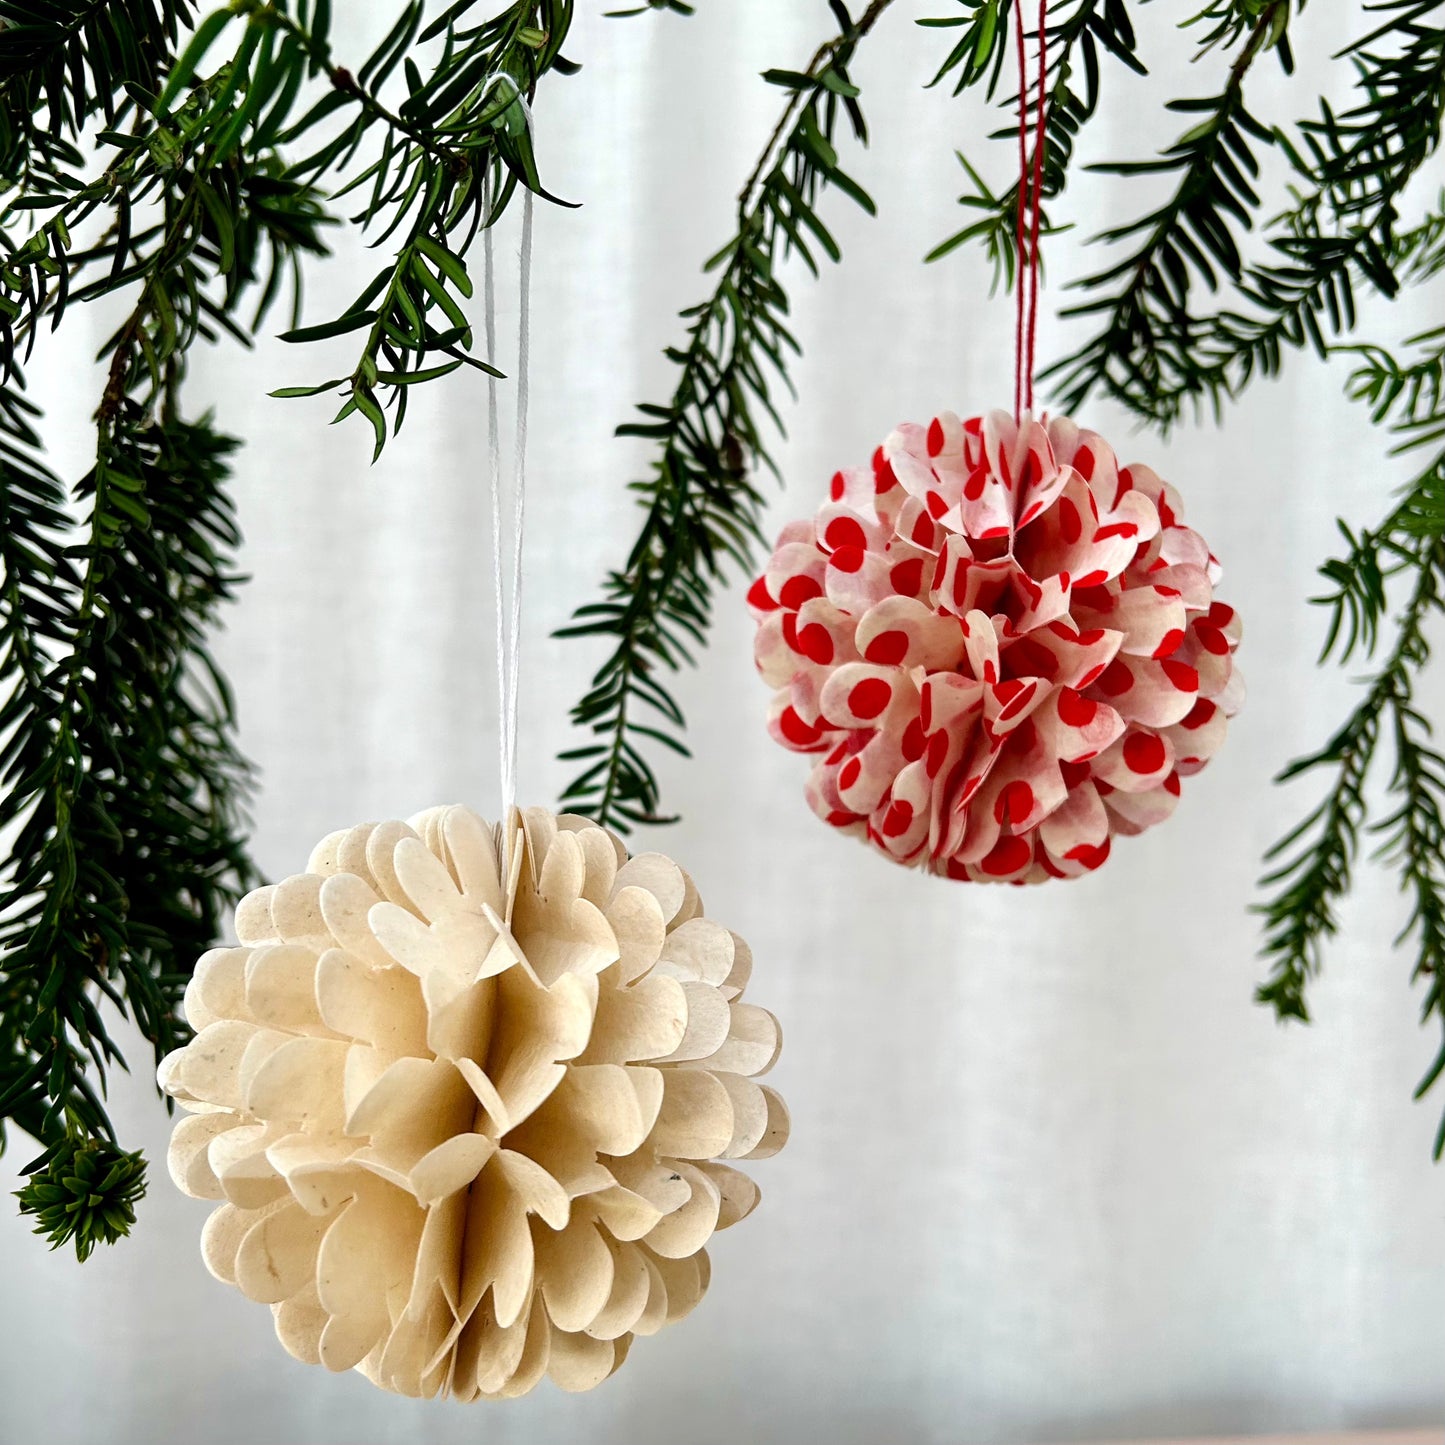 Honeycomb Flower Ornament - Red